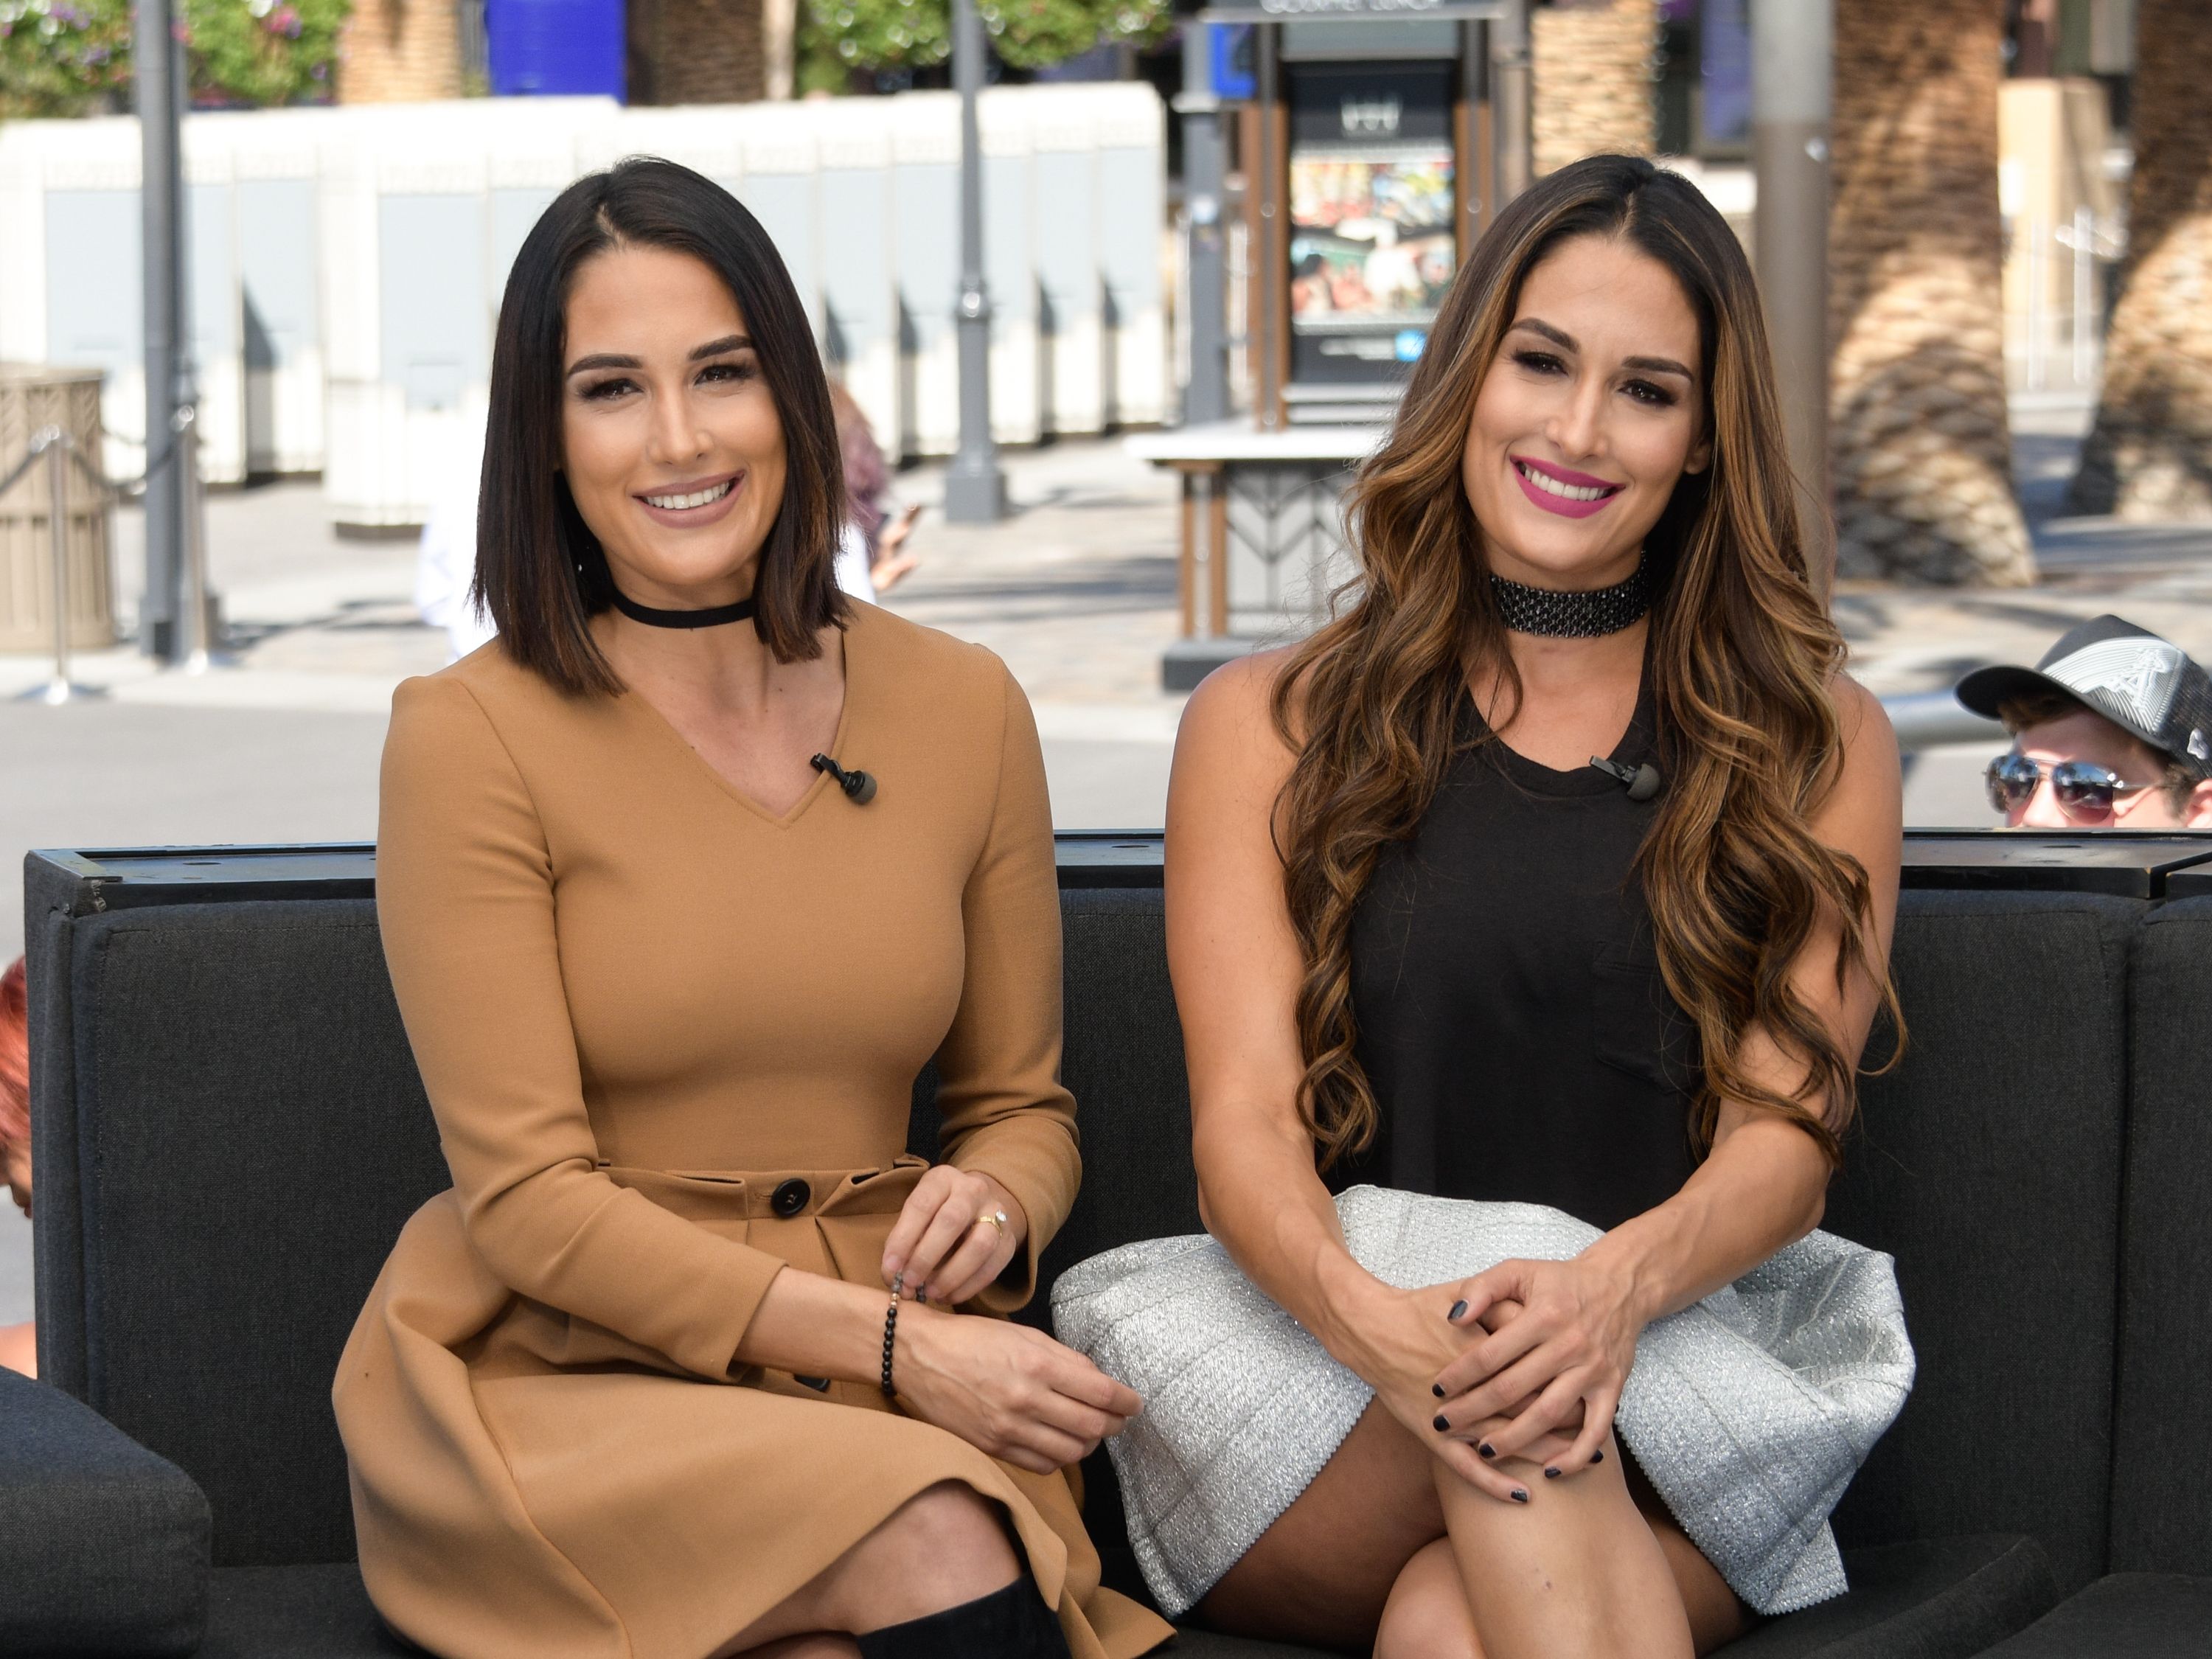 Brie and Nikki Bella visit "Extra" at Universal Studios Hollywood on October 3, 2016, in Universal City, California | Photo: Noel Vasquez/Getty Images